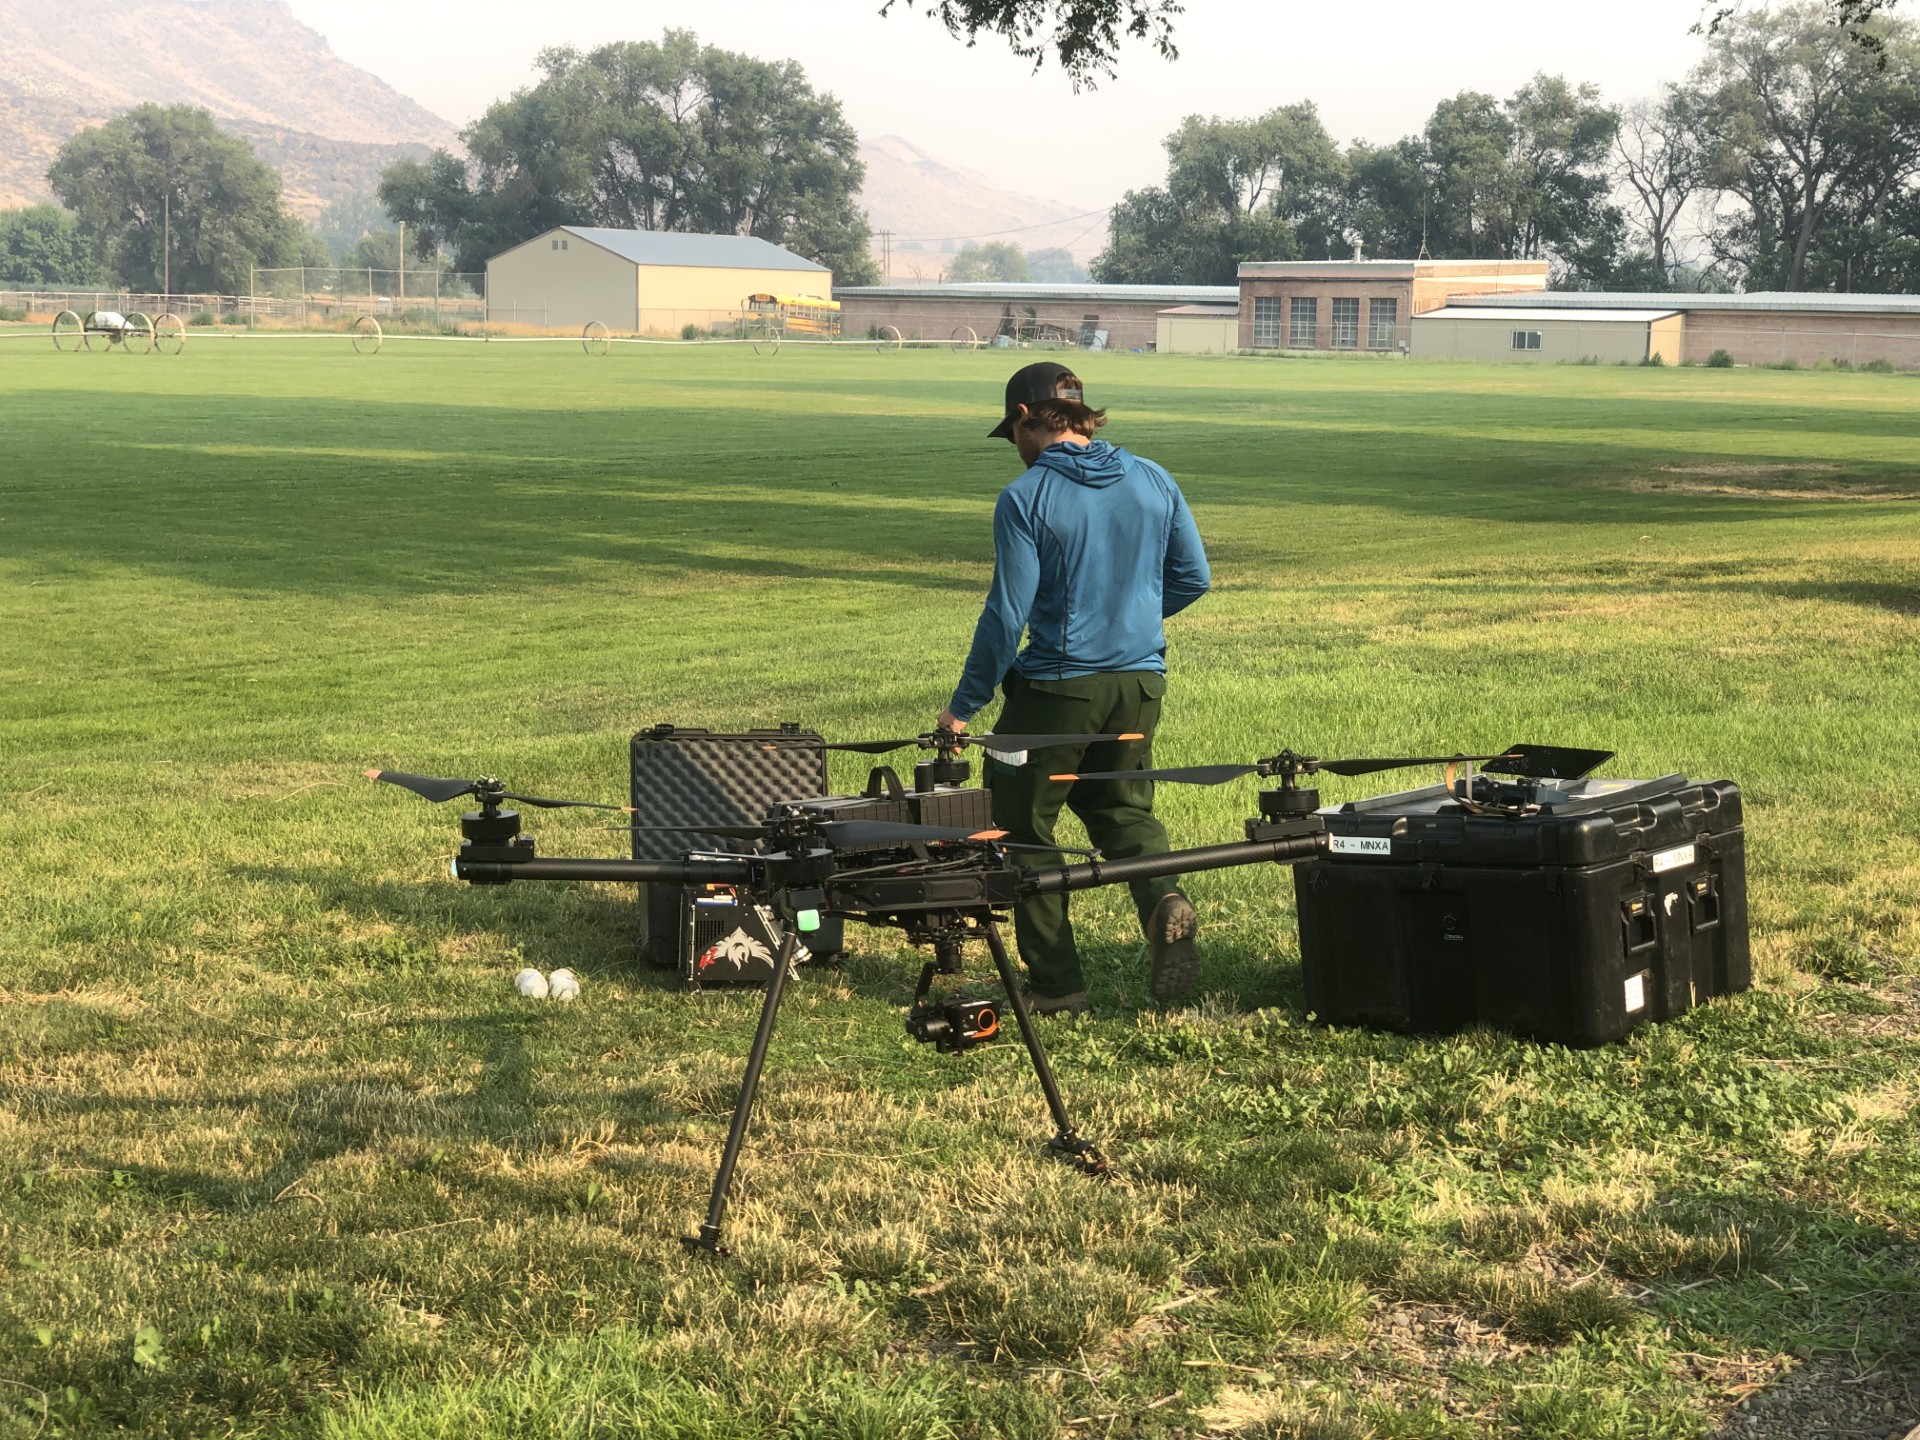 

						Uncrewed Aircraft System (UAS; aka a drone) arrived at Durkee Fire’s Incident Command Post on July
			